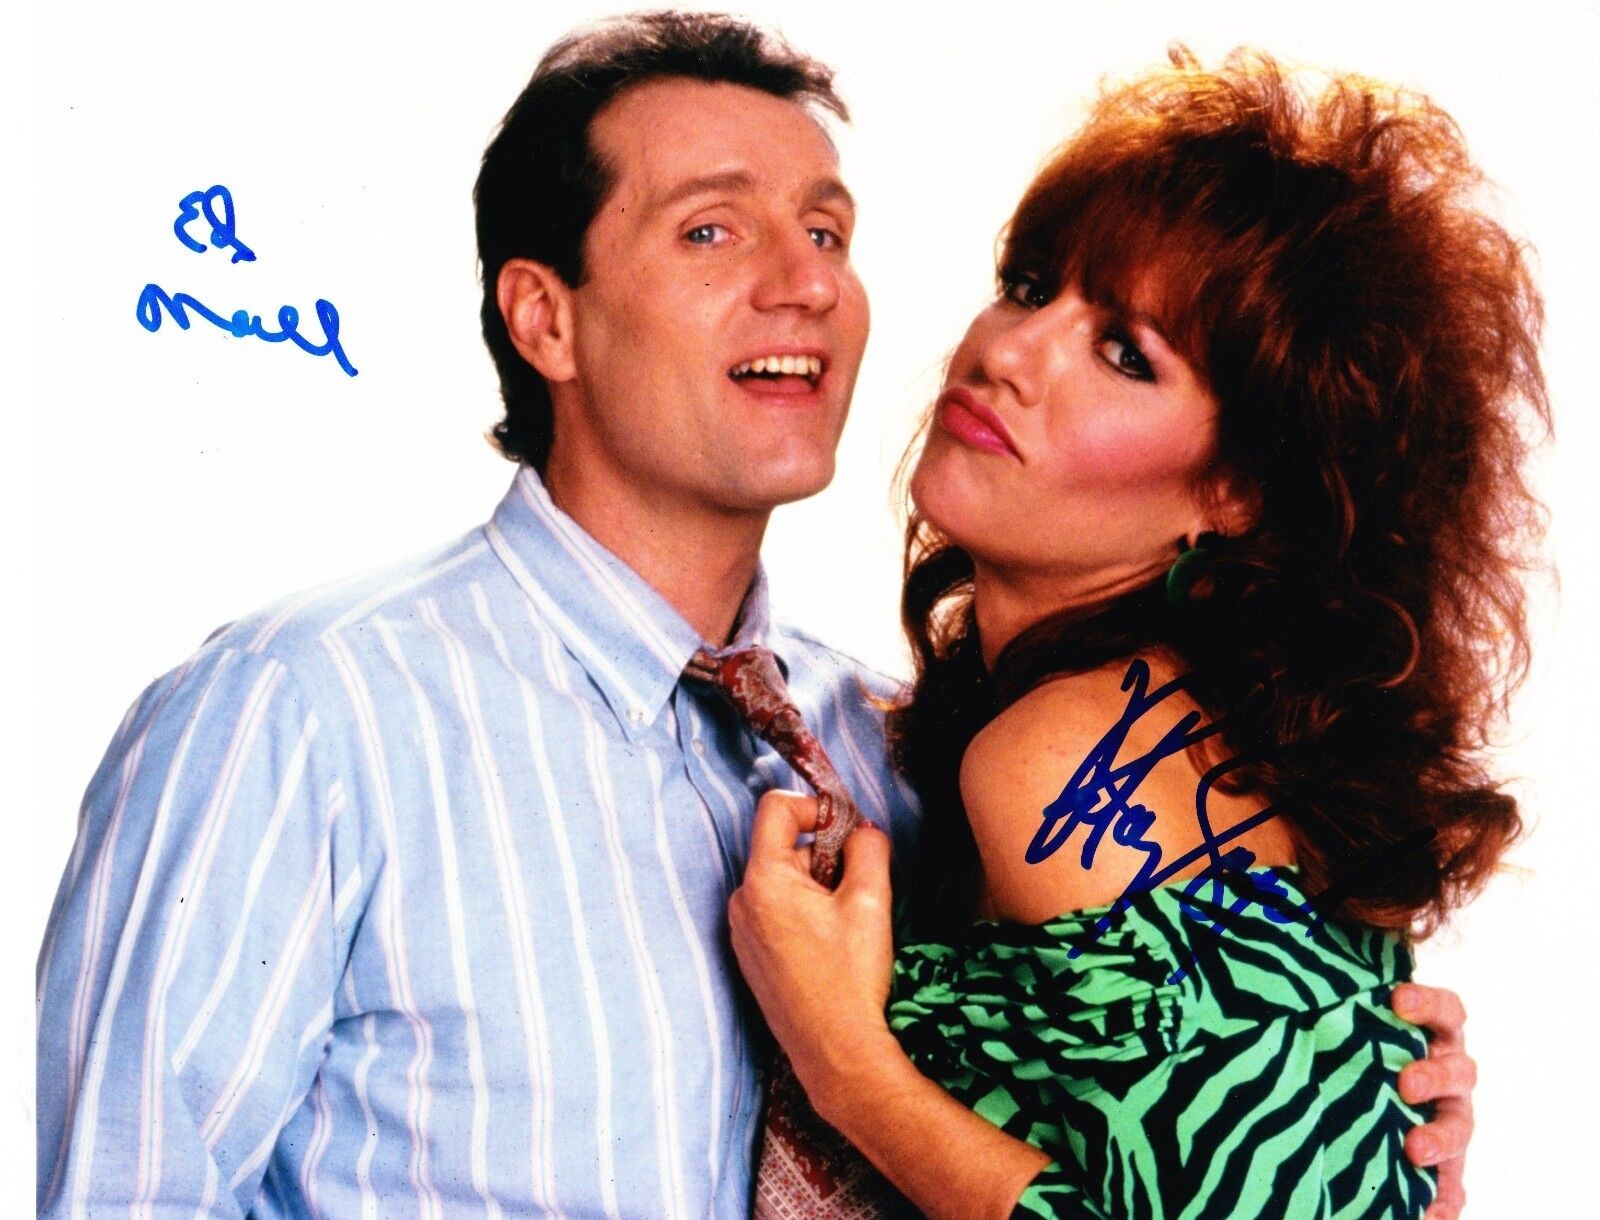 ED O'NEILL KATEY SAGAL SIGNED 8X10 PHOTO BUNDY MARRIED WITH CHILDREN PROOF PIC B